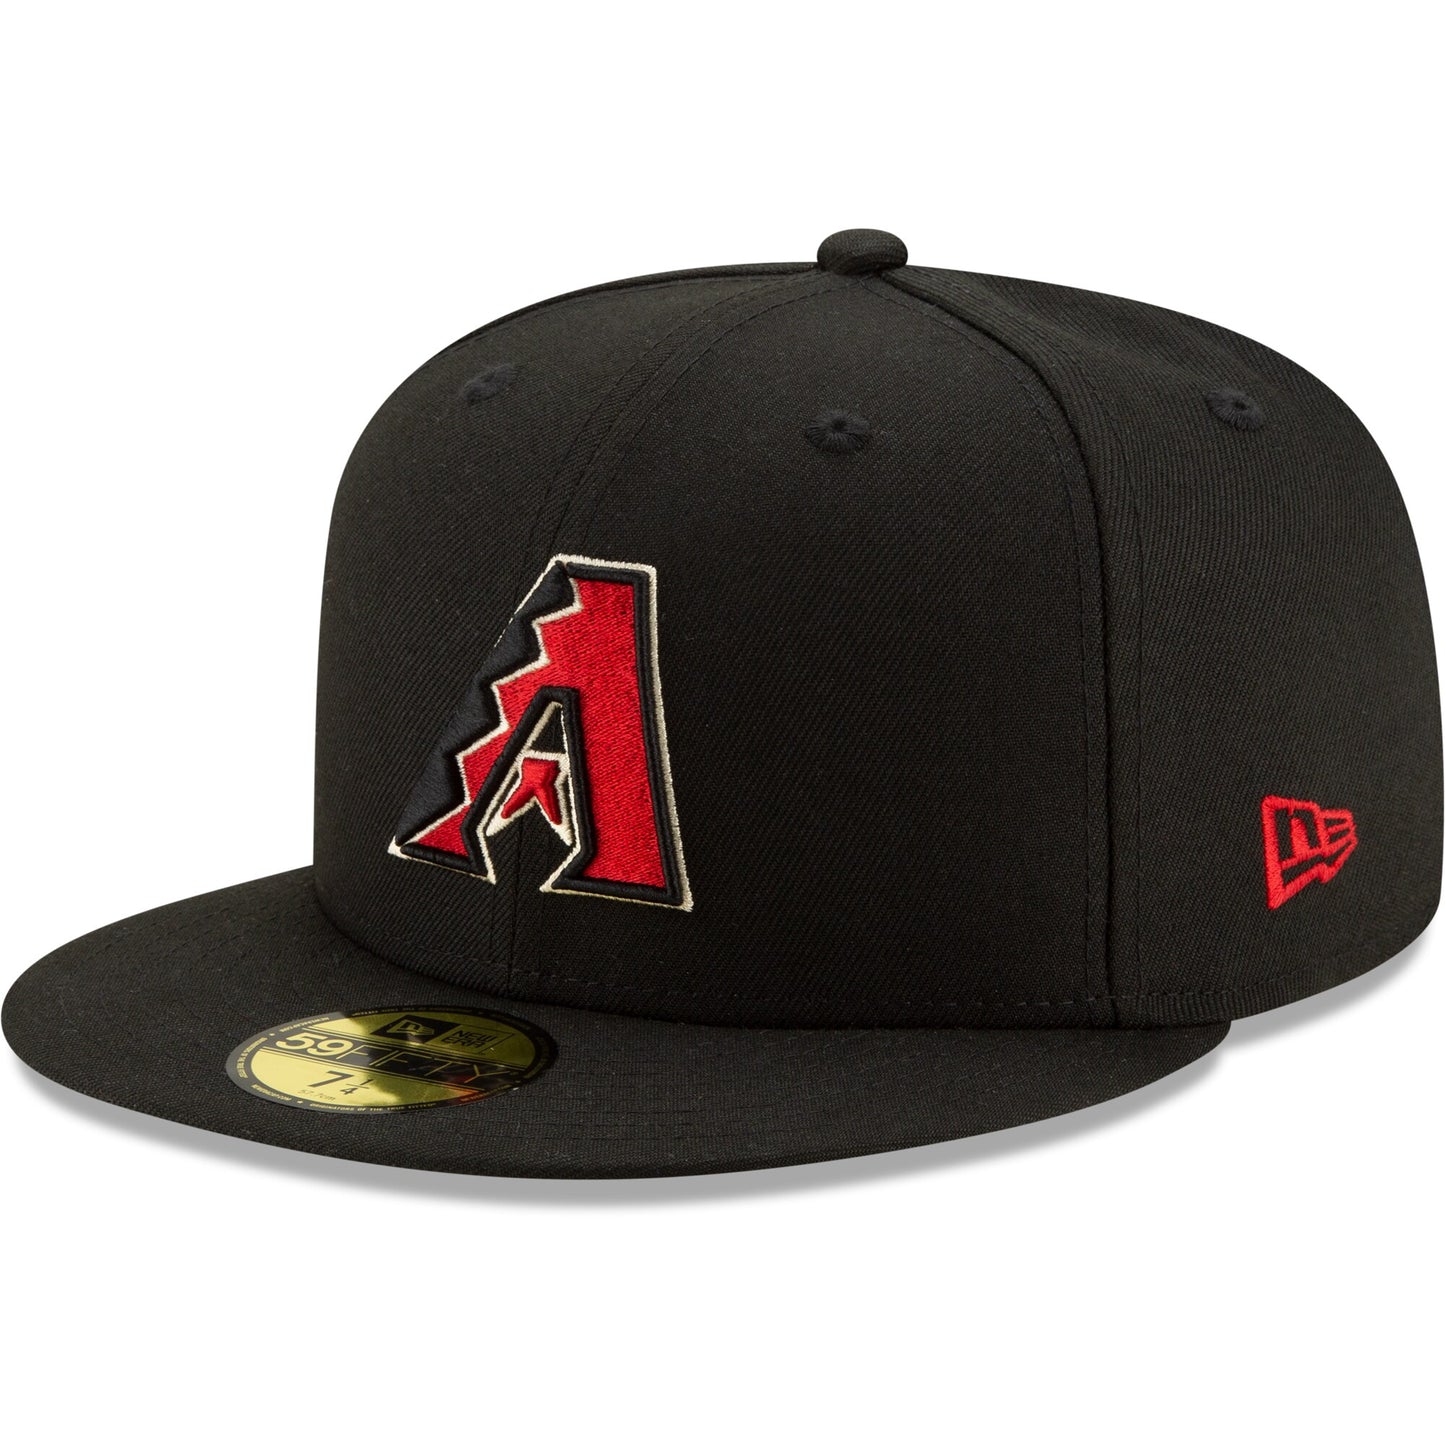 Arizona Diamondbacks New Era On-Field Authentic Collection 59FIFTY Fitted Hat - Black